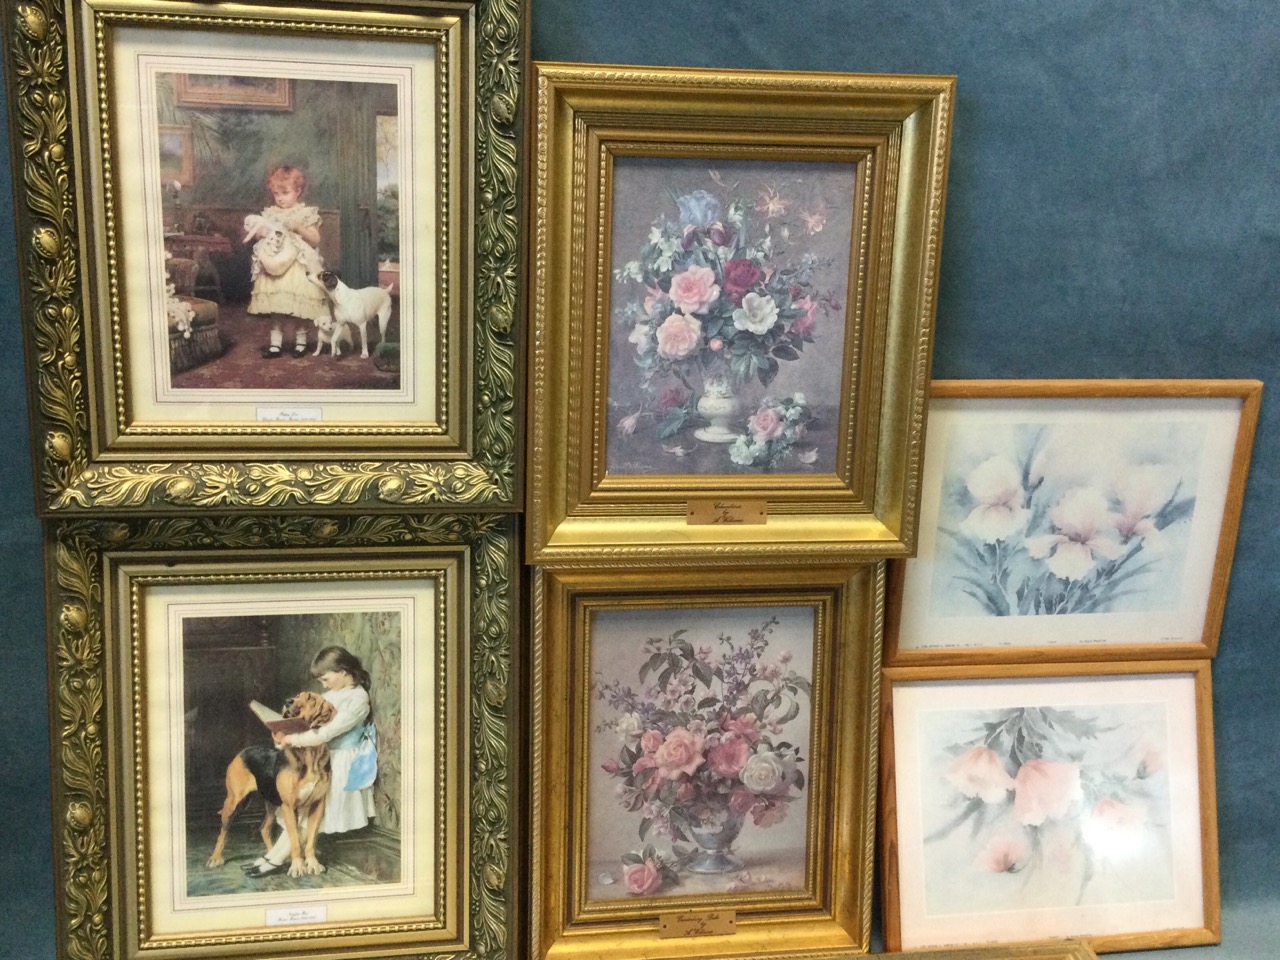 Five pairs of framed prints - sentimental Victorian style with dogs in art nouveau type frames, - Image 2 of 3